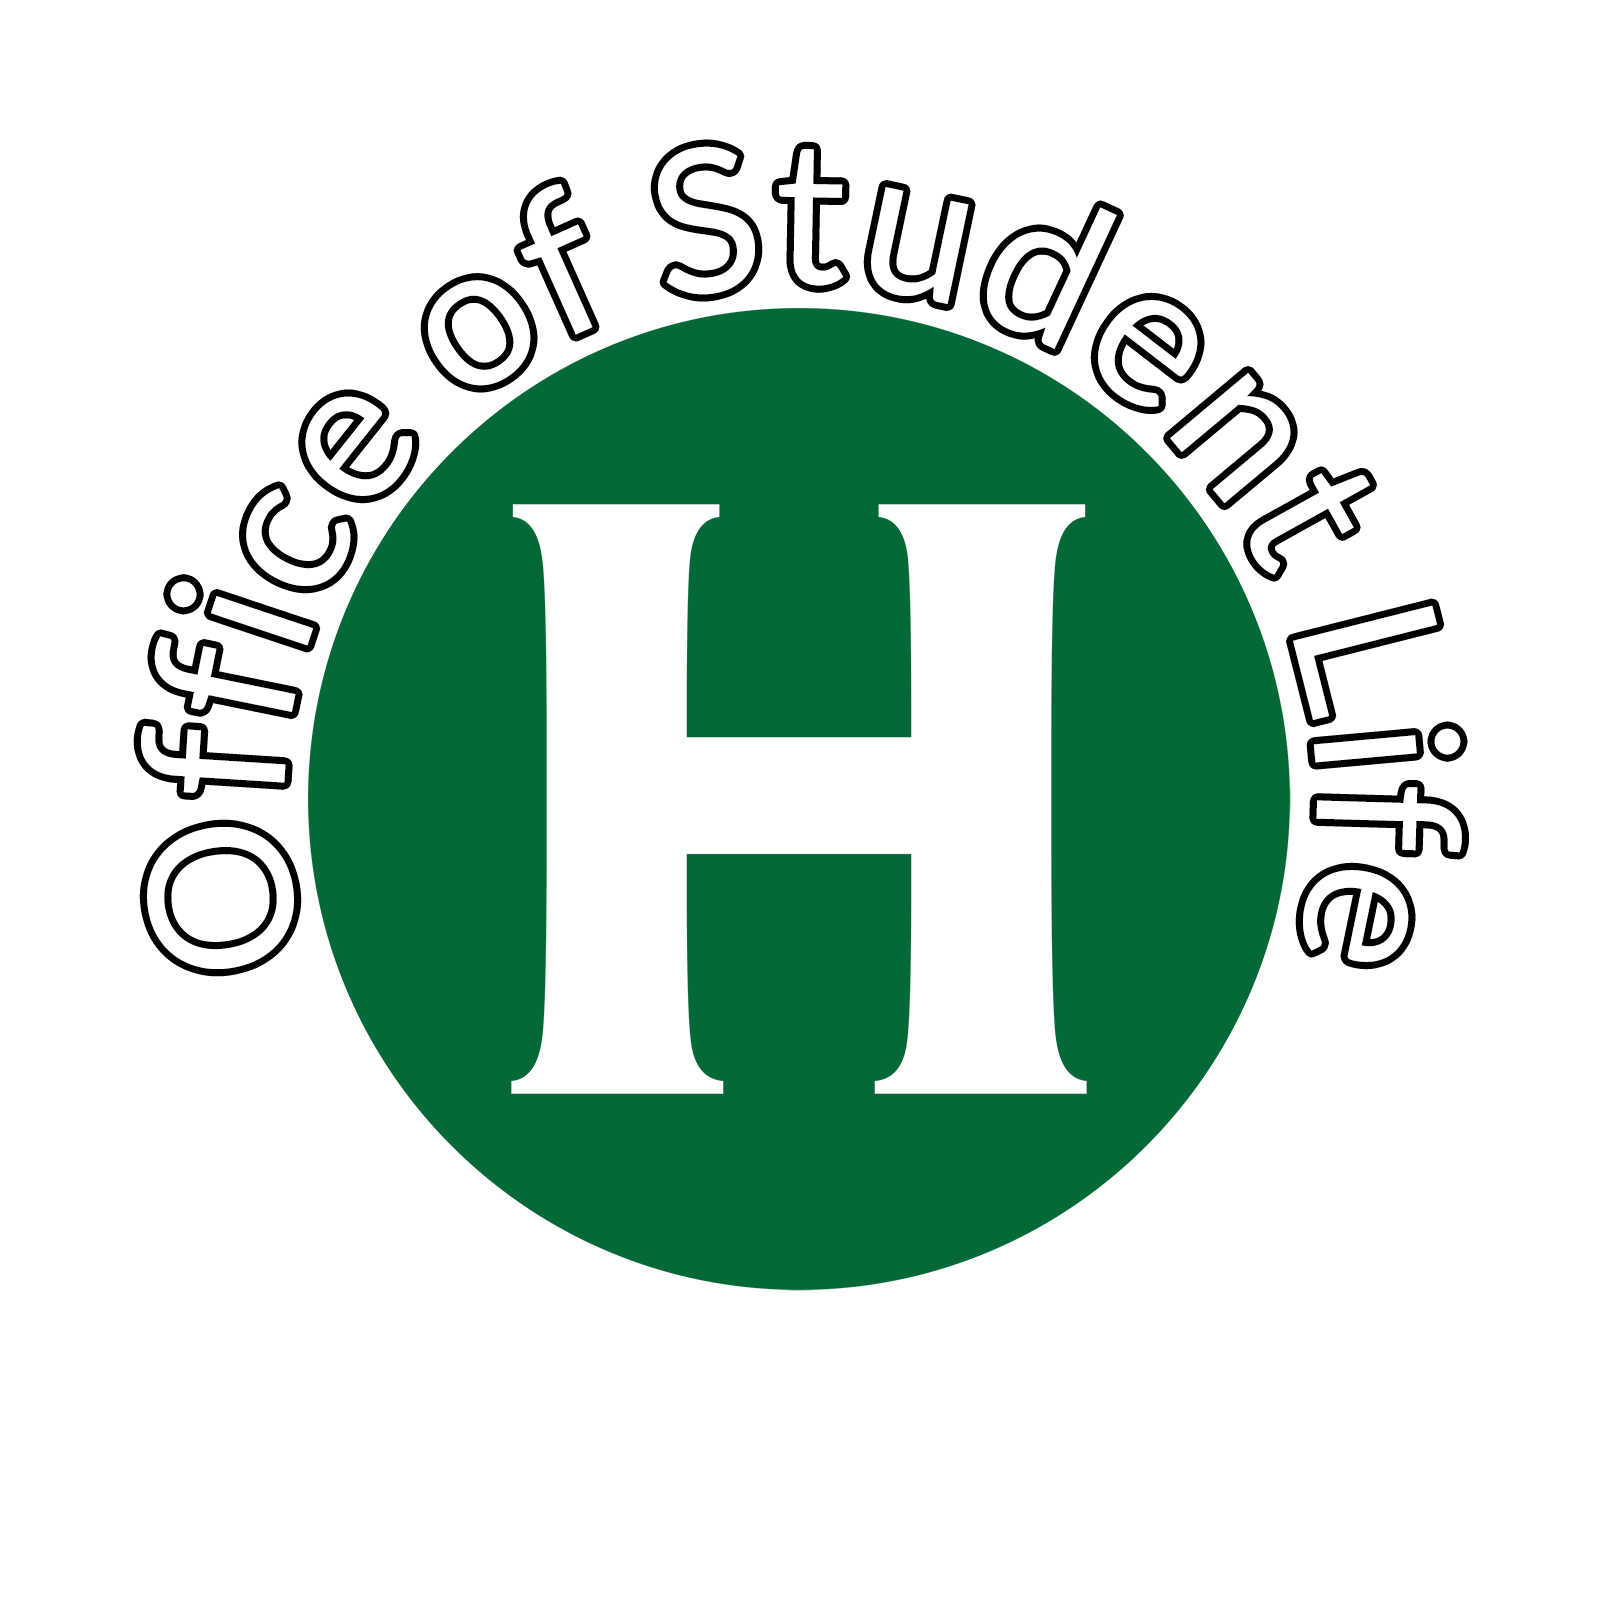 Office of Student Life